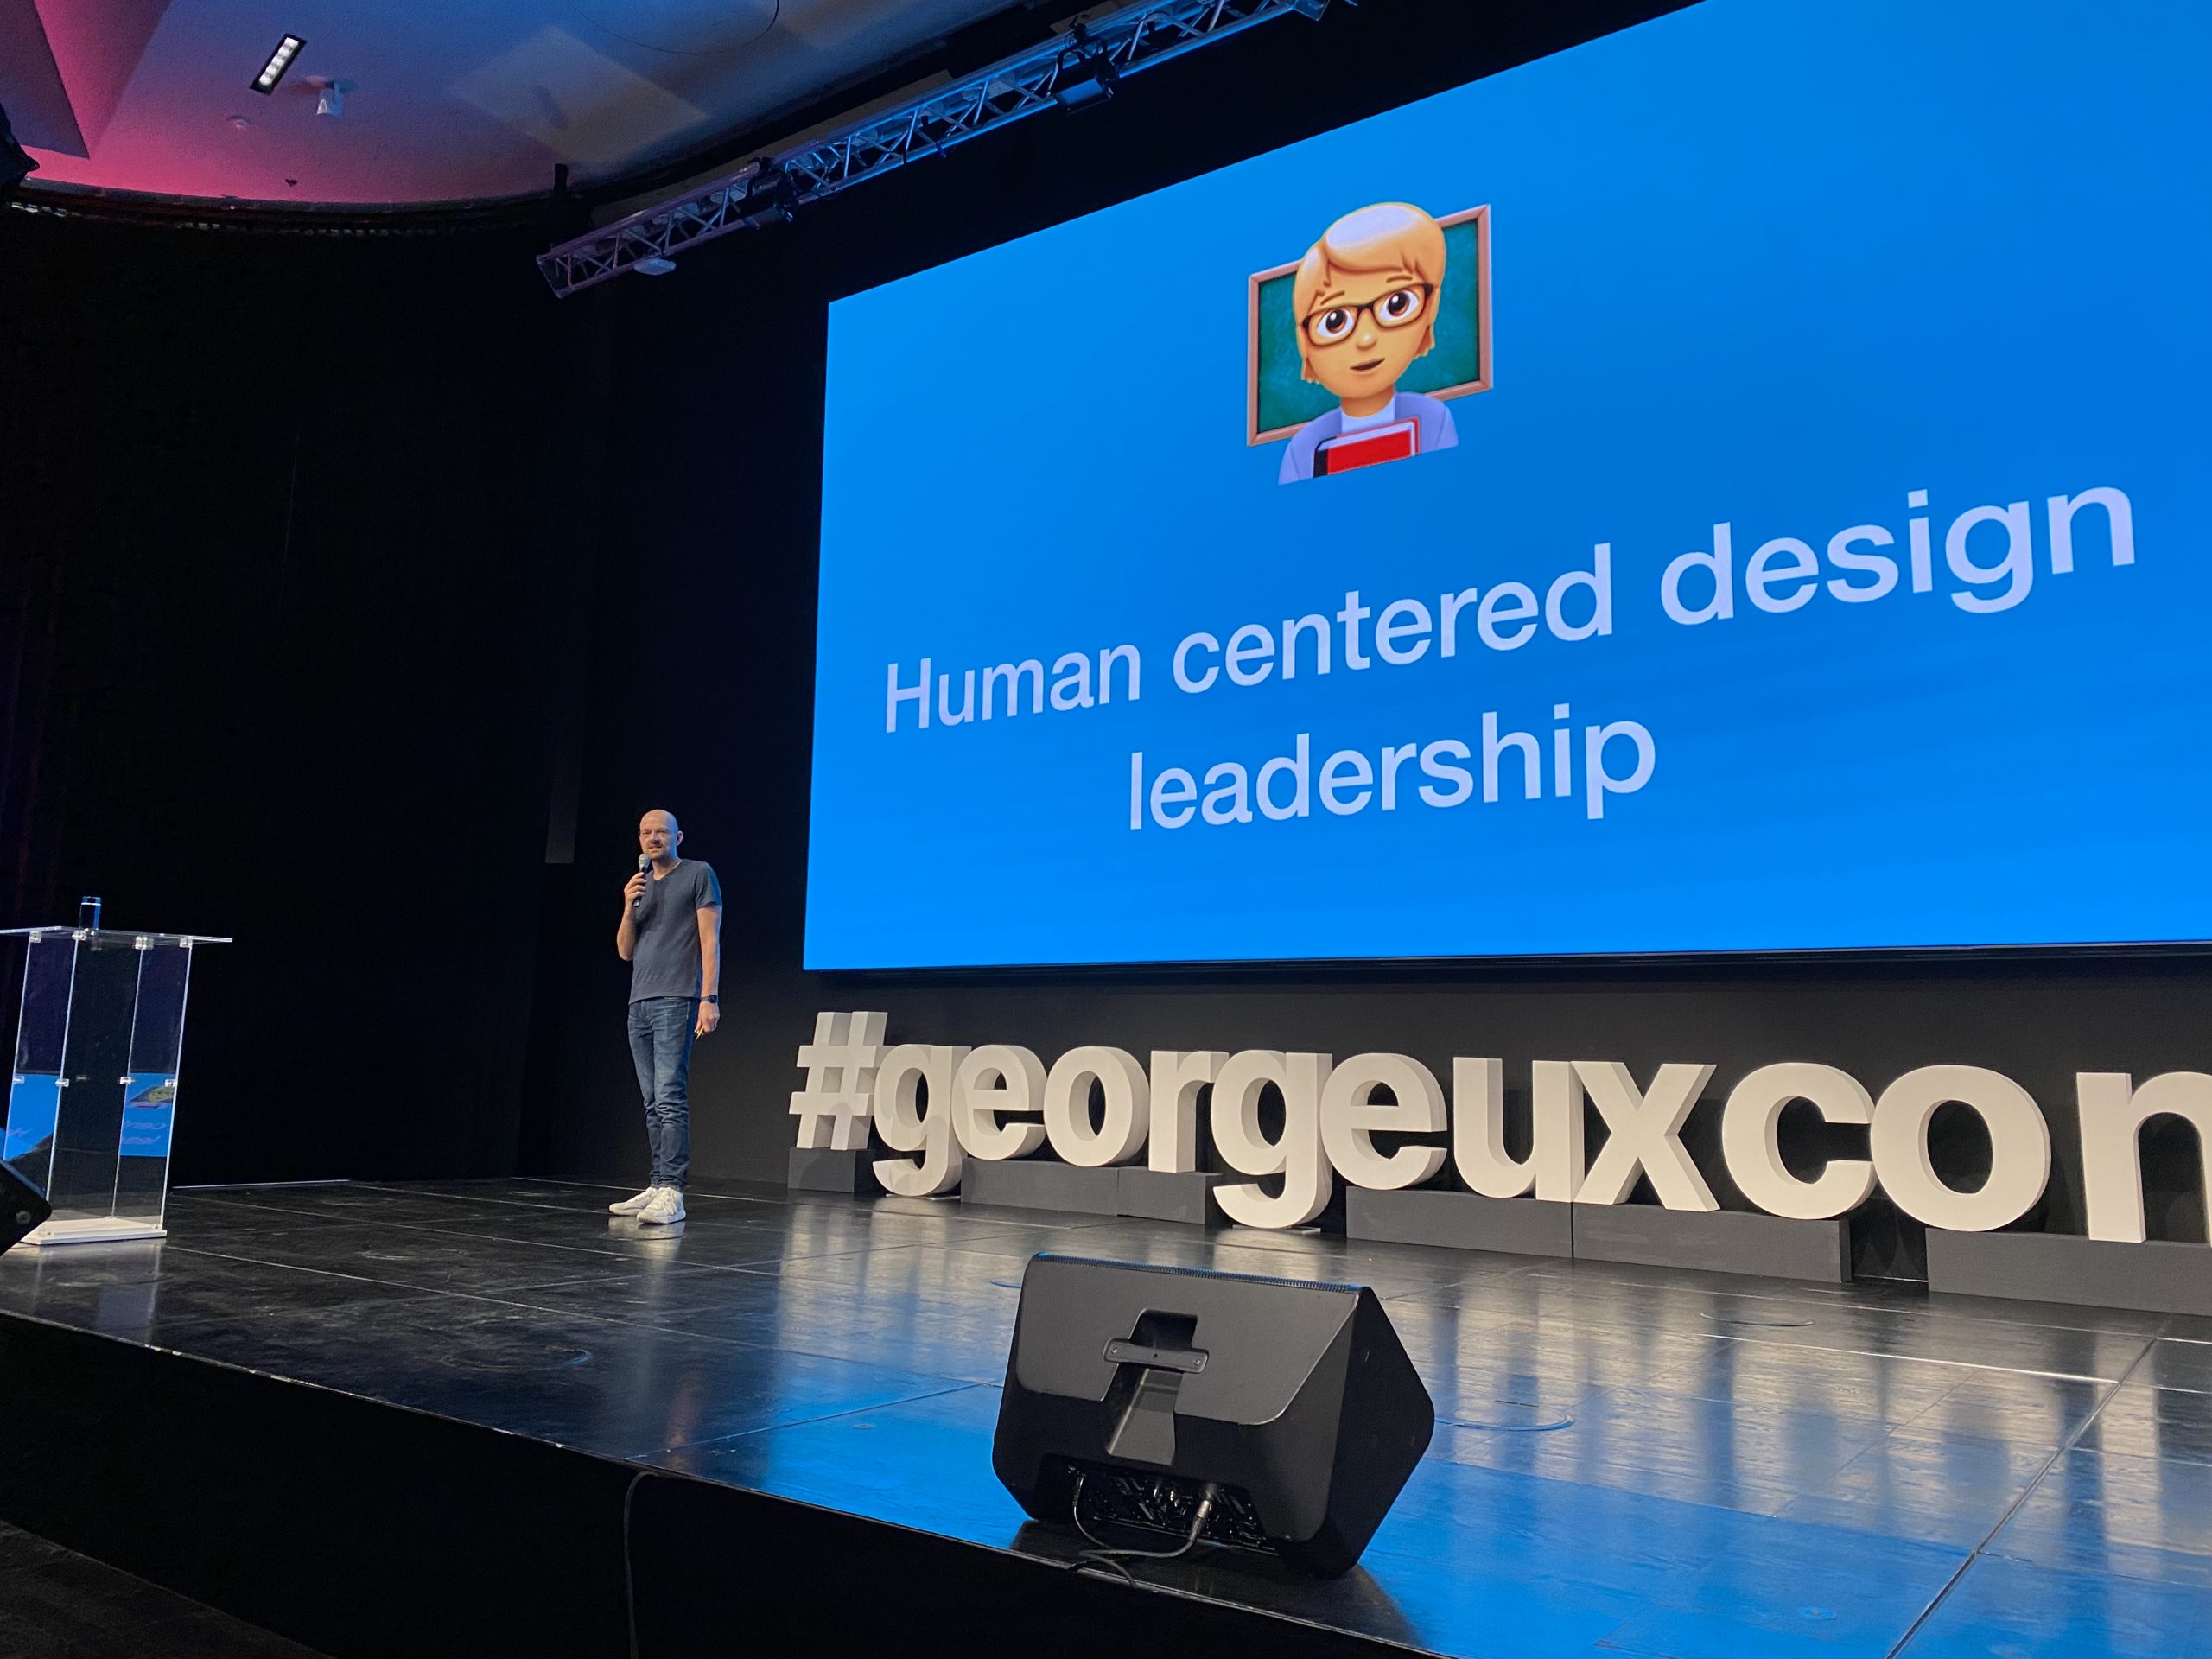 Wolfgang Bremer is holding his keynote "Human Centered Design Leadership" at the George UX Conference in Vienna